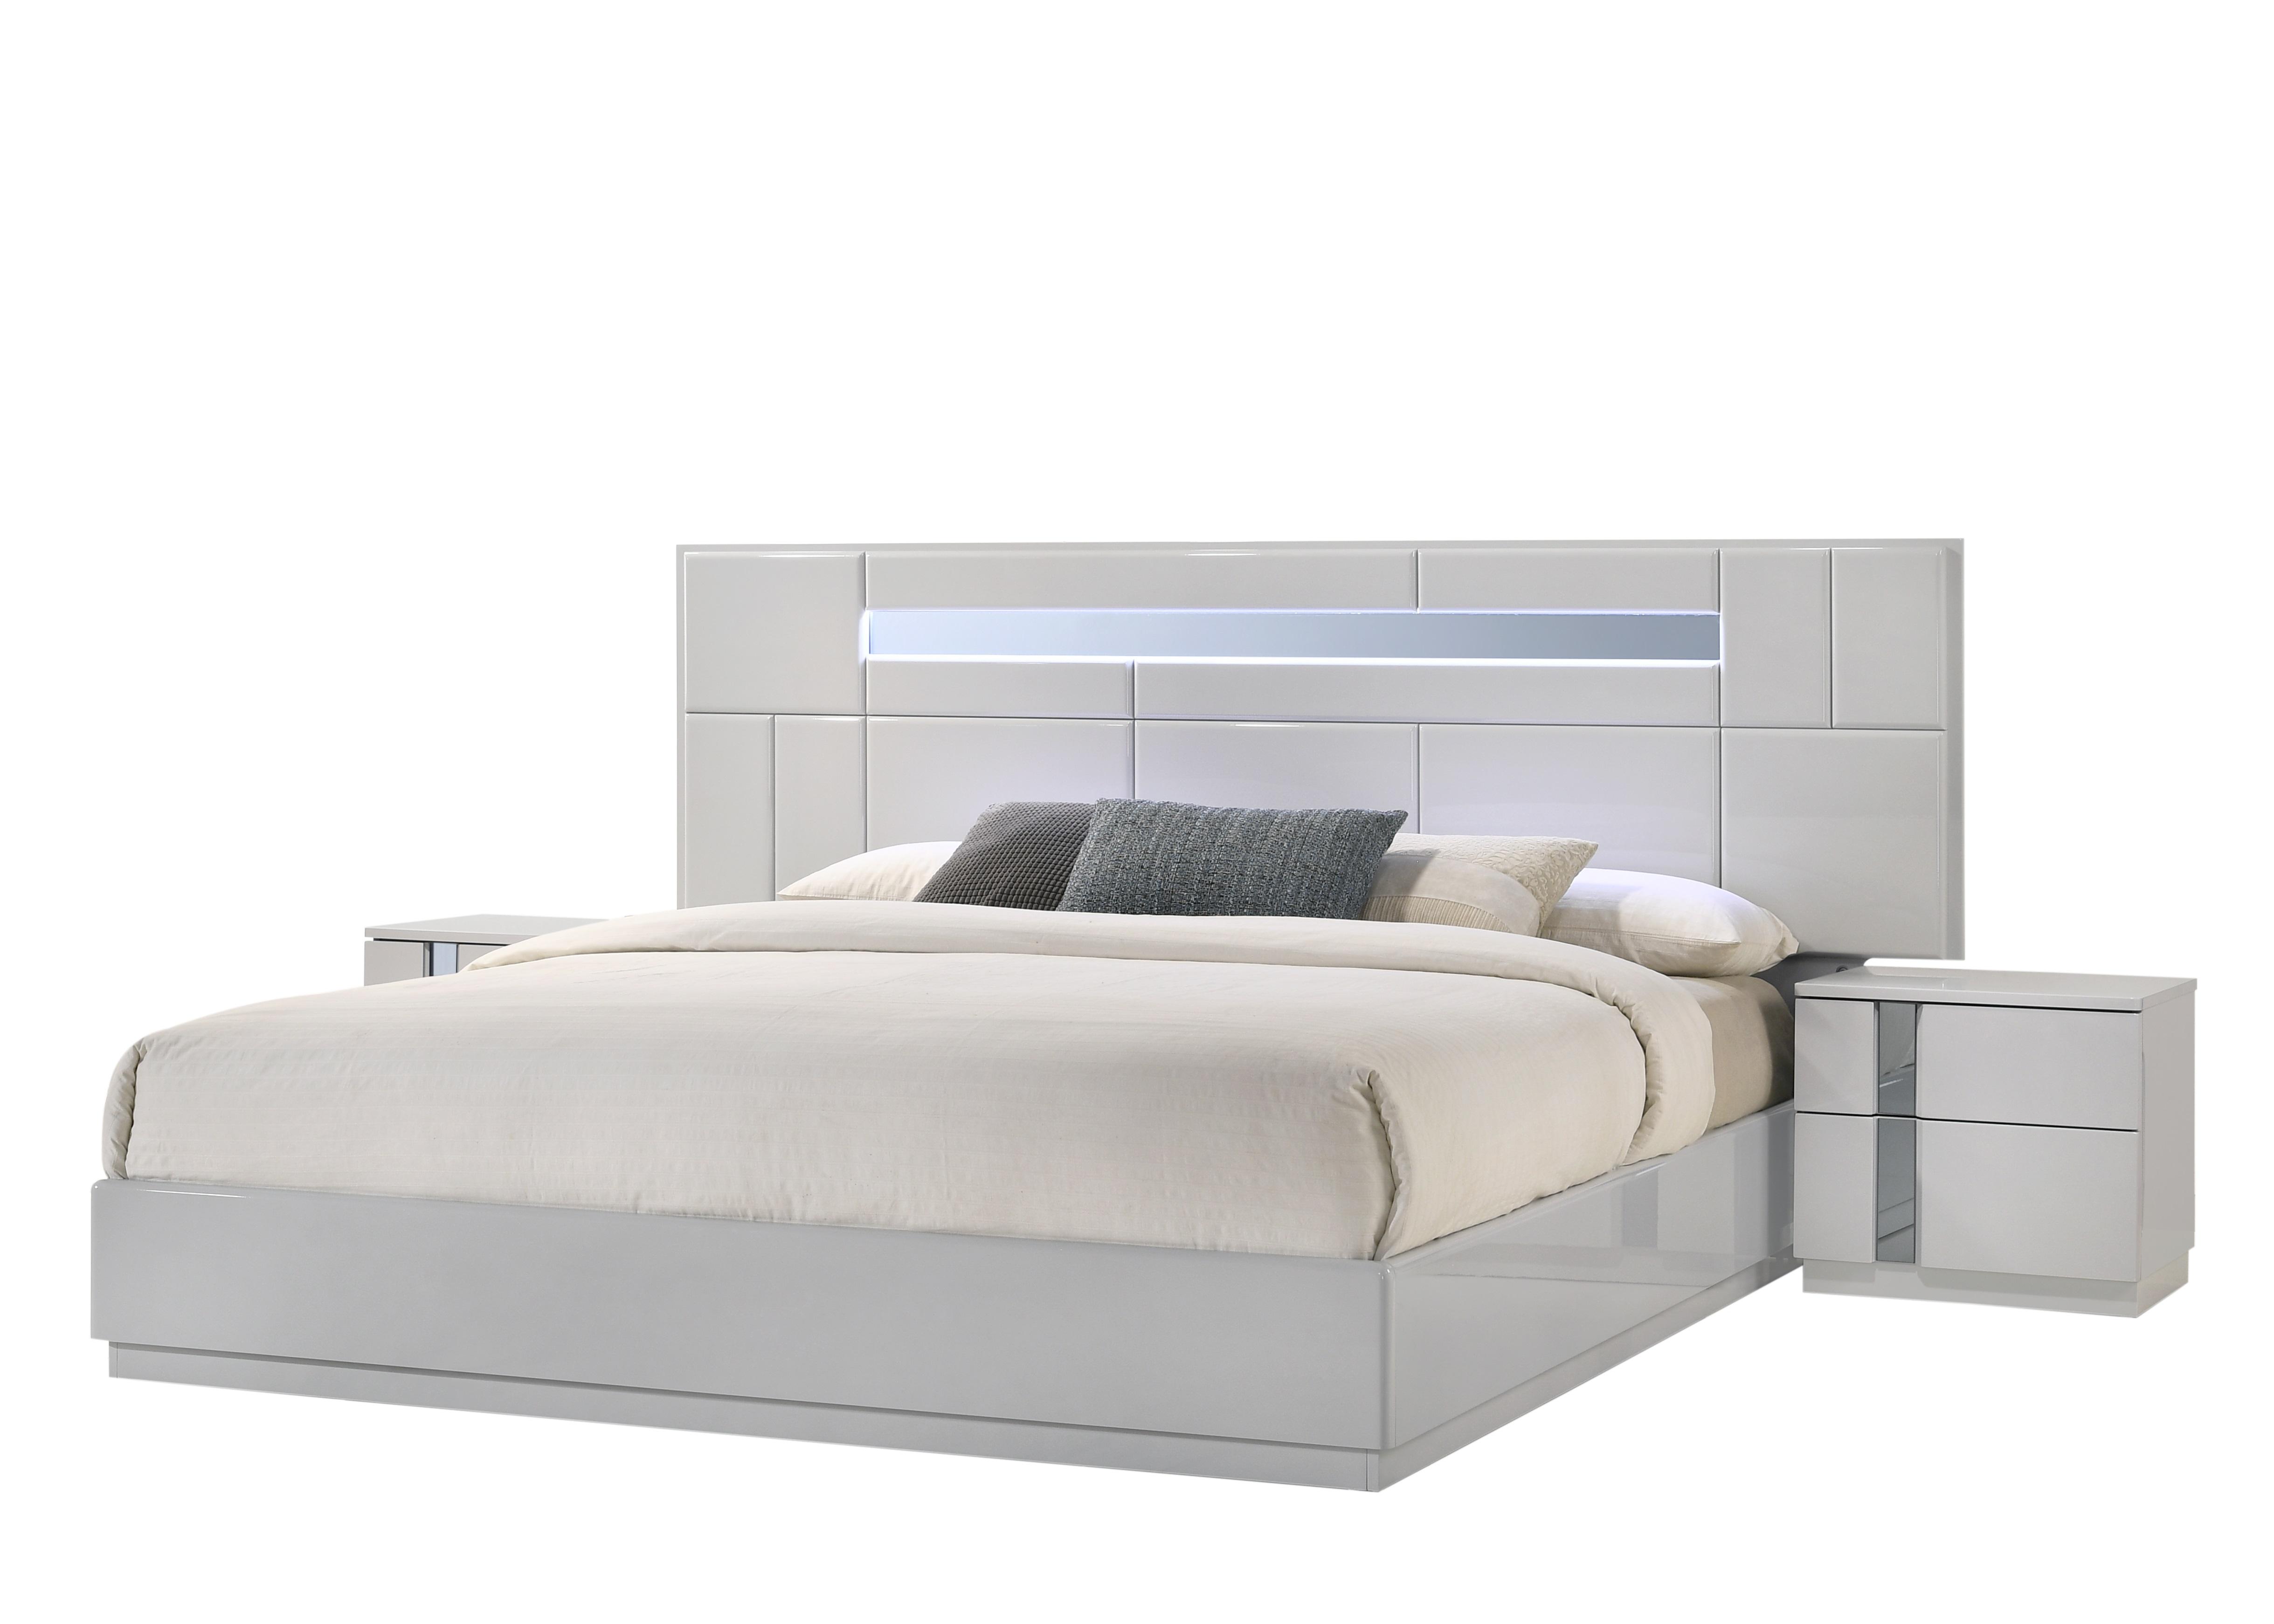 

    
Contemporary King Bedroom Set in Gray Lacquer and Chrome Set 3Pcs J&M Palermo
